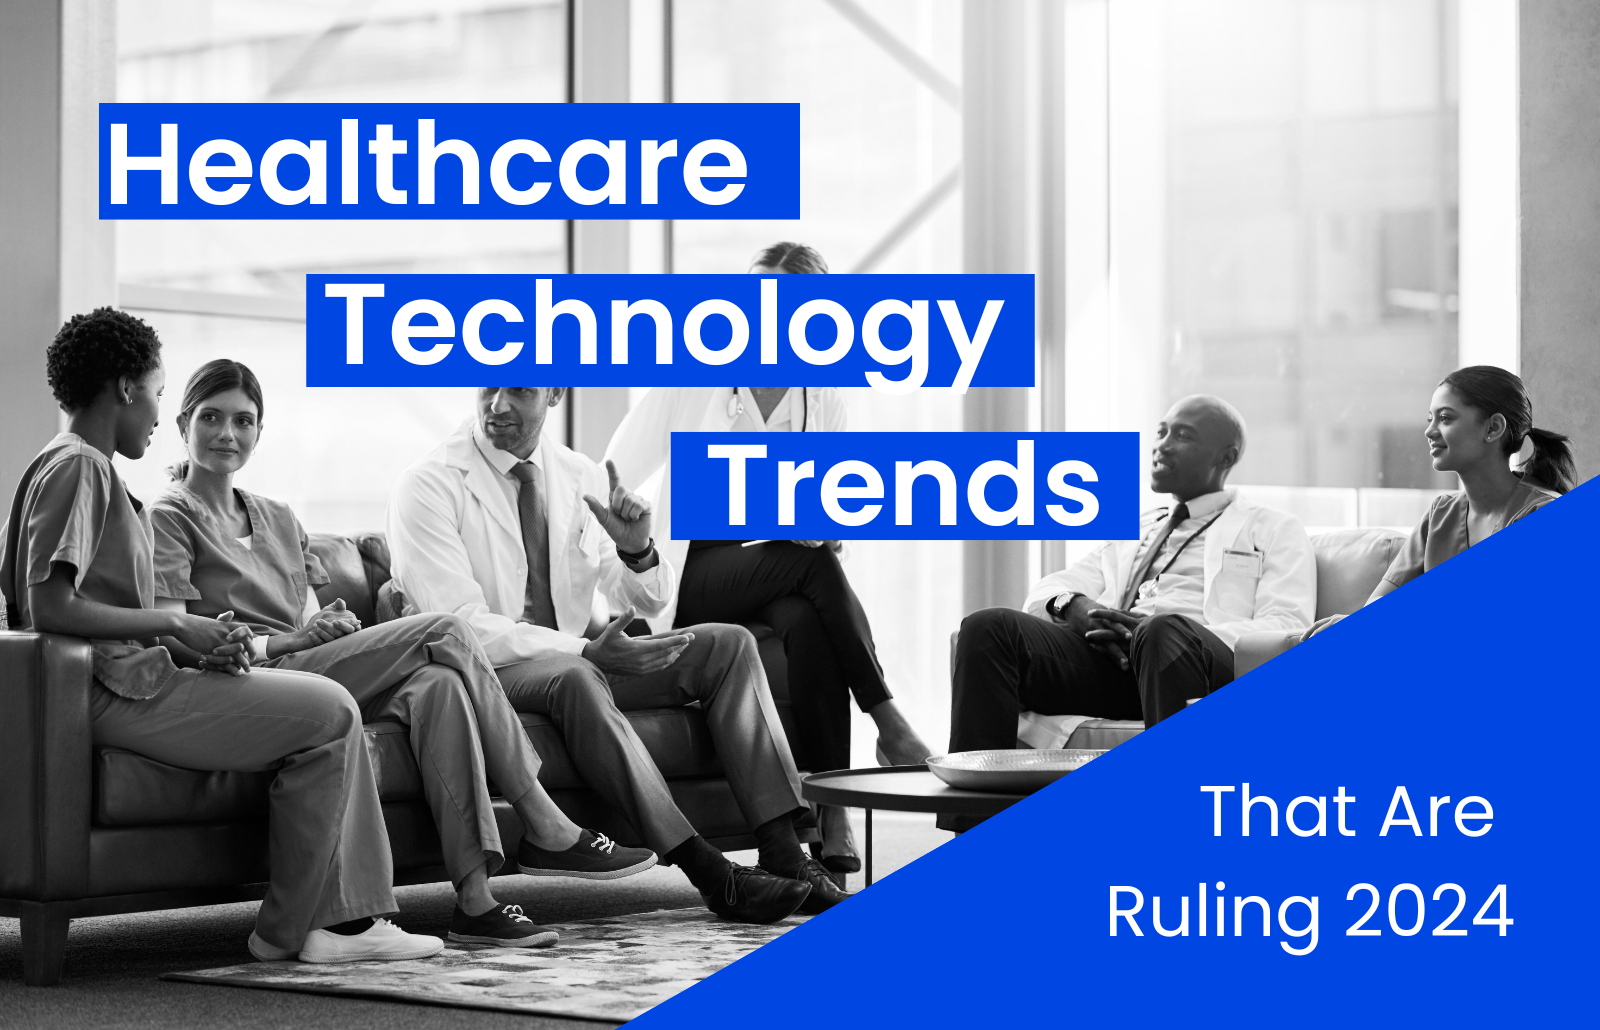 Healthcare Technology Trends That Are Ruling 2024